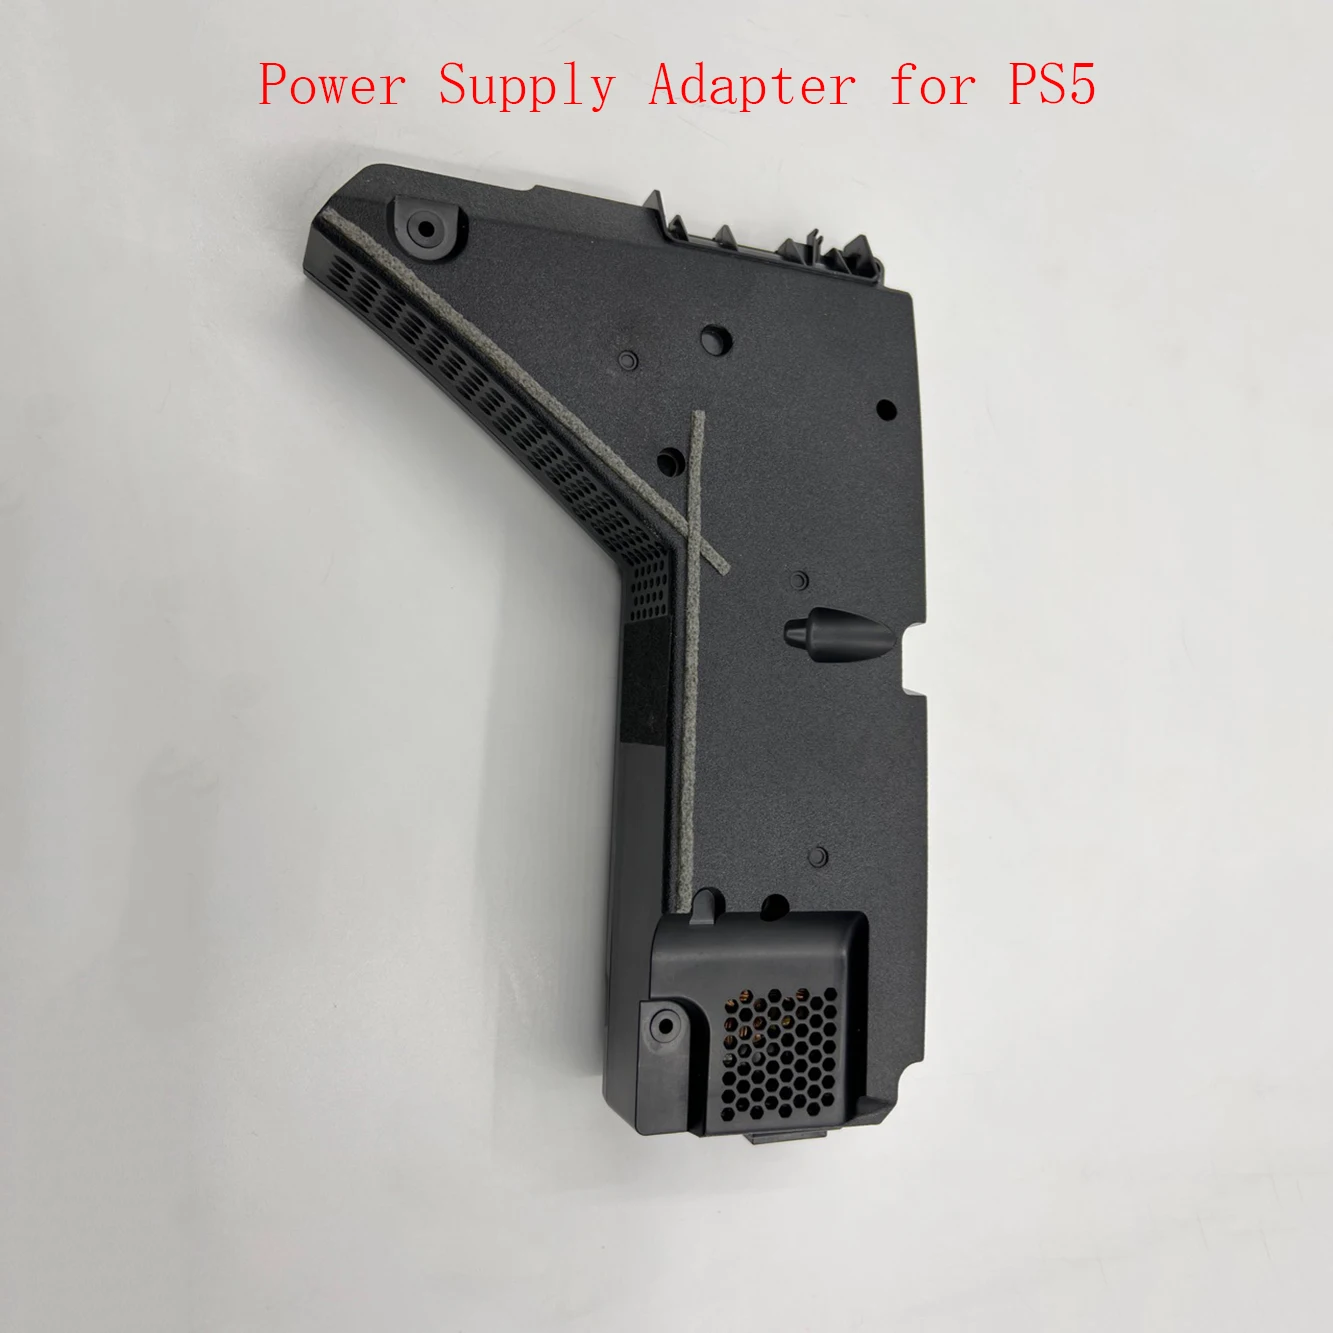 

Power Supply Adapter for PS5 Multifunction Replacement Power Supply Unit Console ADP‑400DR 100-127V 200-240V